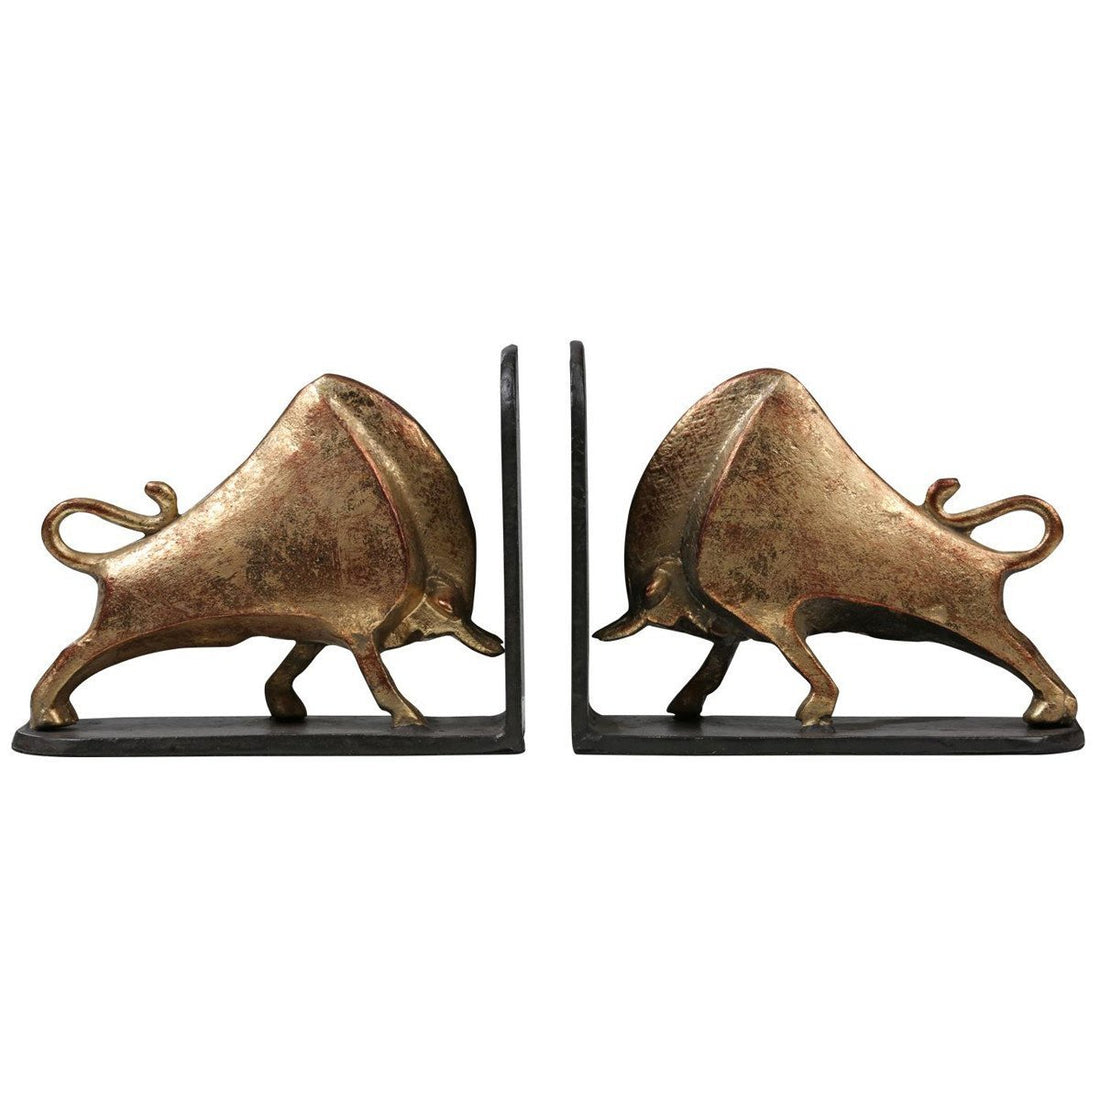 Bungalow 5 Bisoni Bookends Set of 2 in Gold